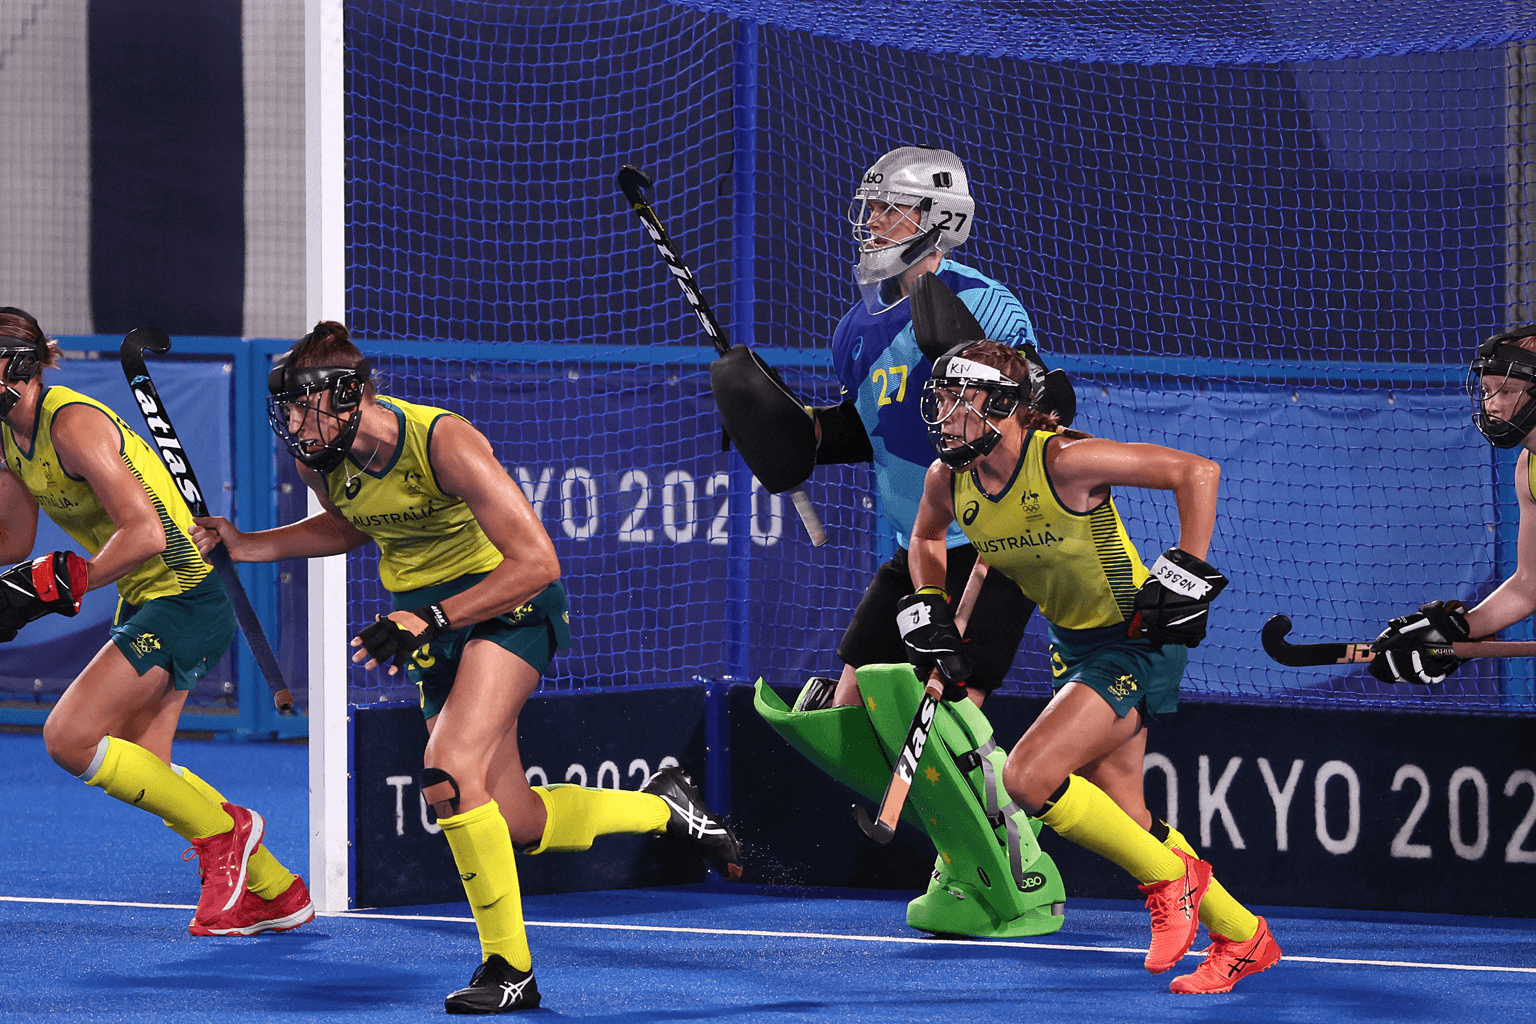 Members of the Hockeyroos Australian women's hockey team run out of goal, with keeper Rachael Lynch in blue protective clothing. Photo: Getty Images